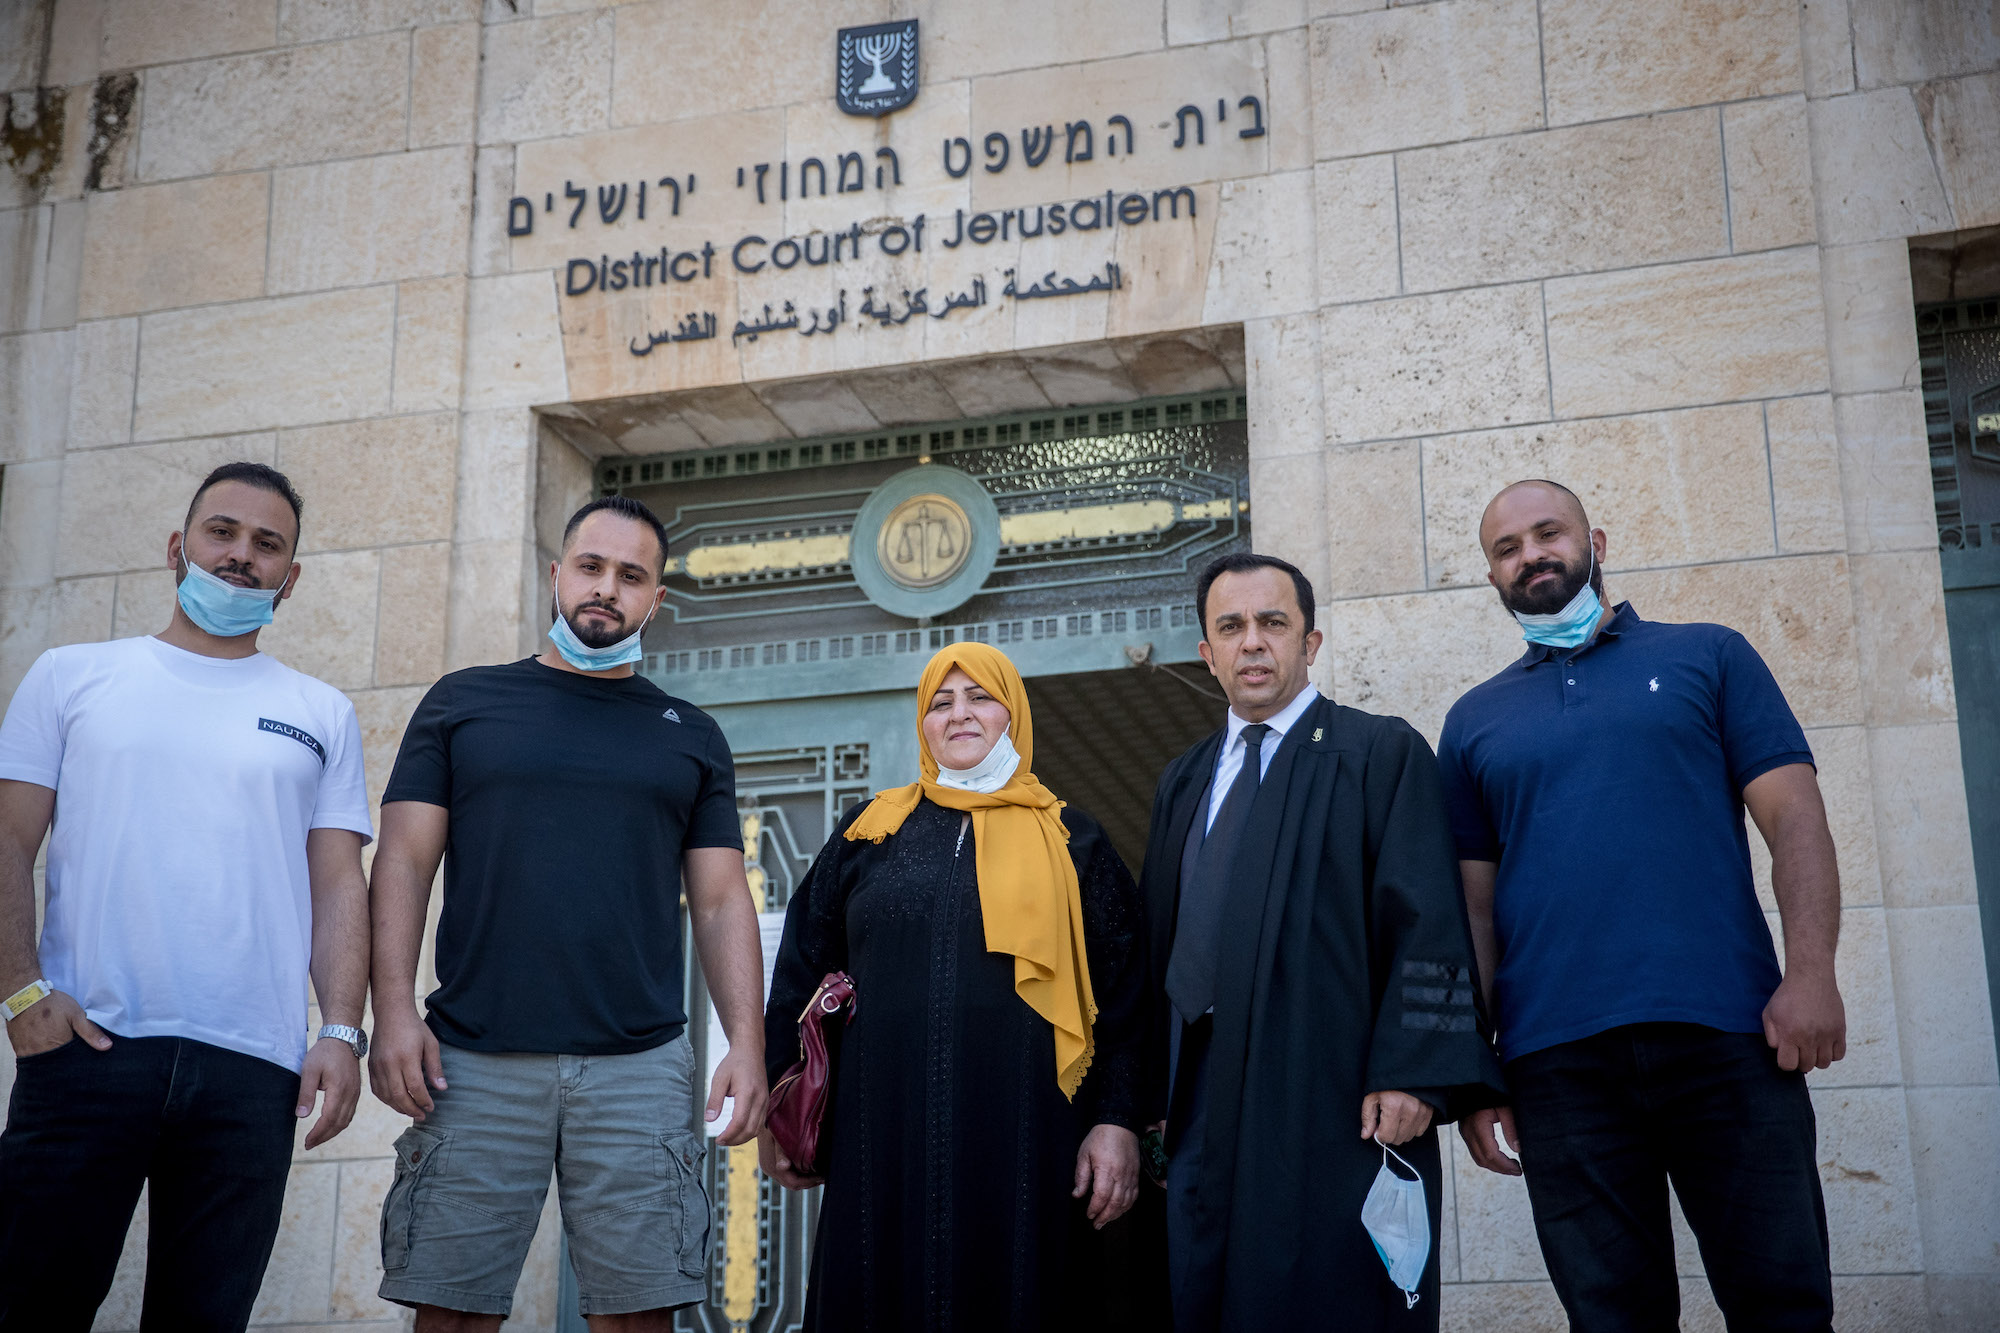 Members of the Sumarin family arrive with their attorney at the Jerusalem District Court, June 30, 2020. (Yonatan Sindel/Flash90)